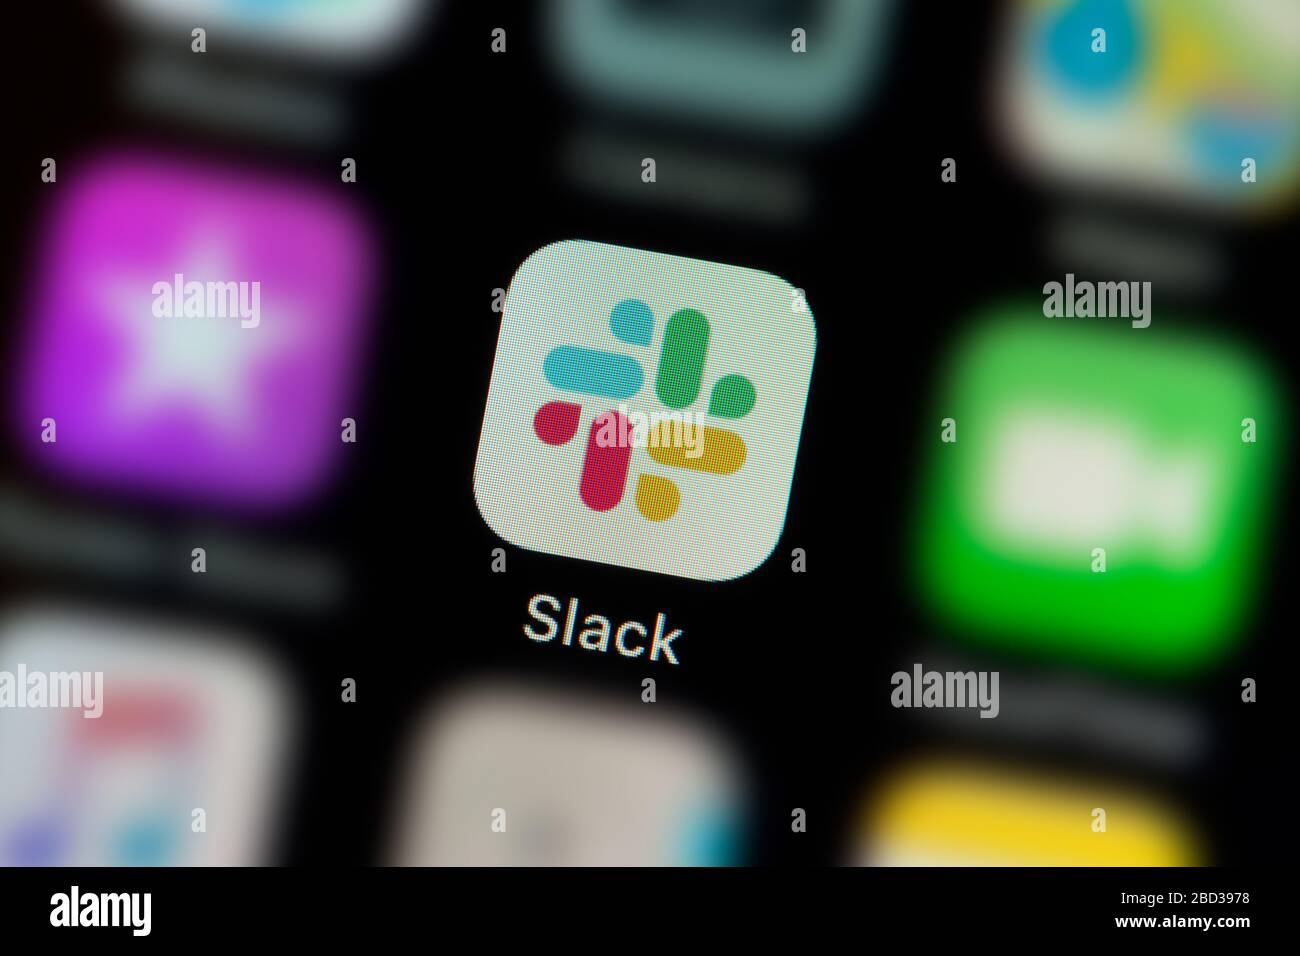 A close-up shot of the Slack app icon, as seen on the screen of a smart phone (Editorial use only) Stock Photo